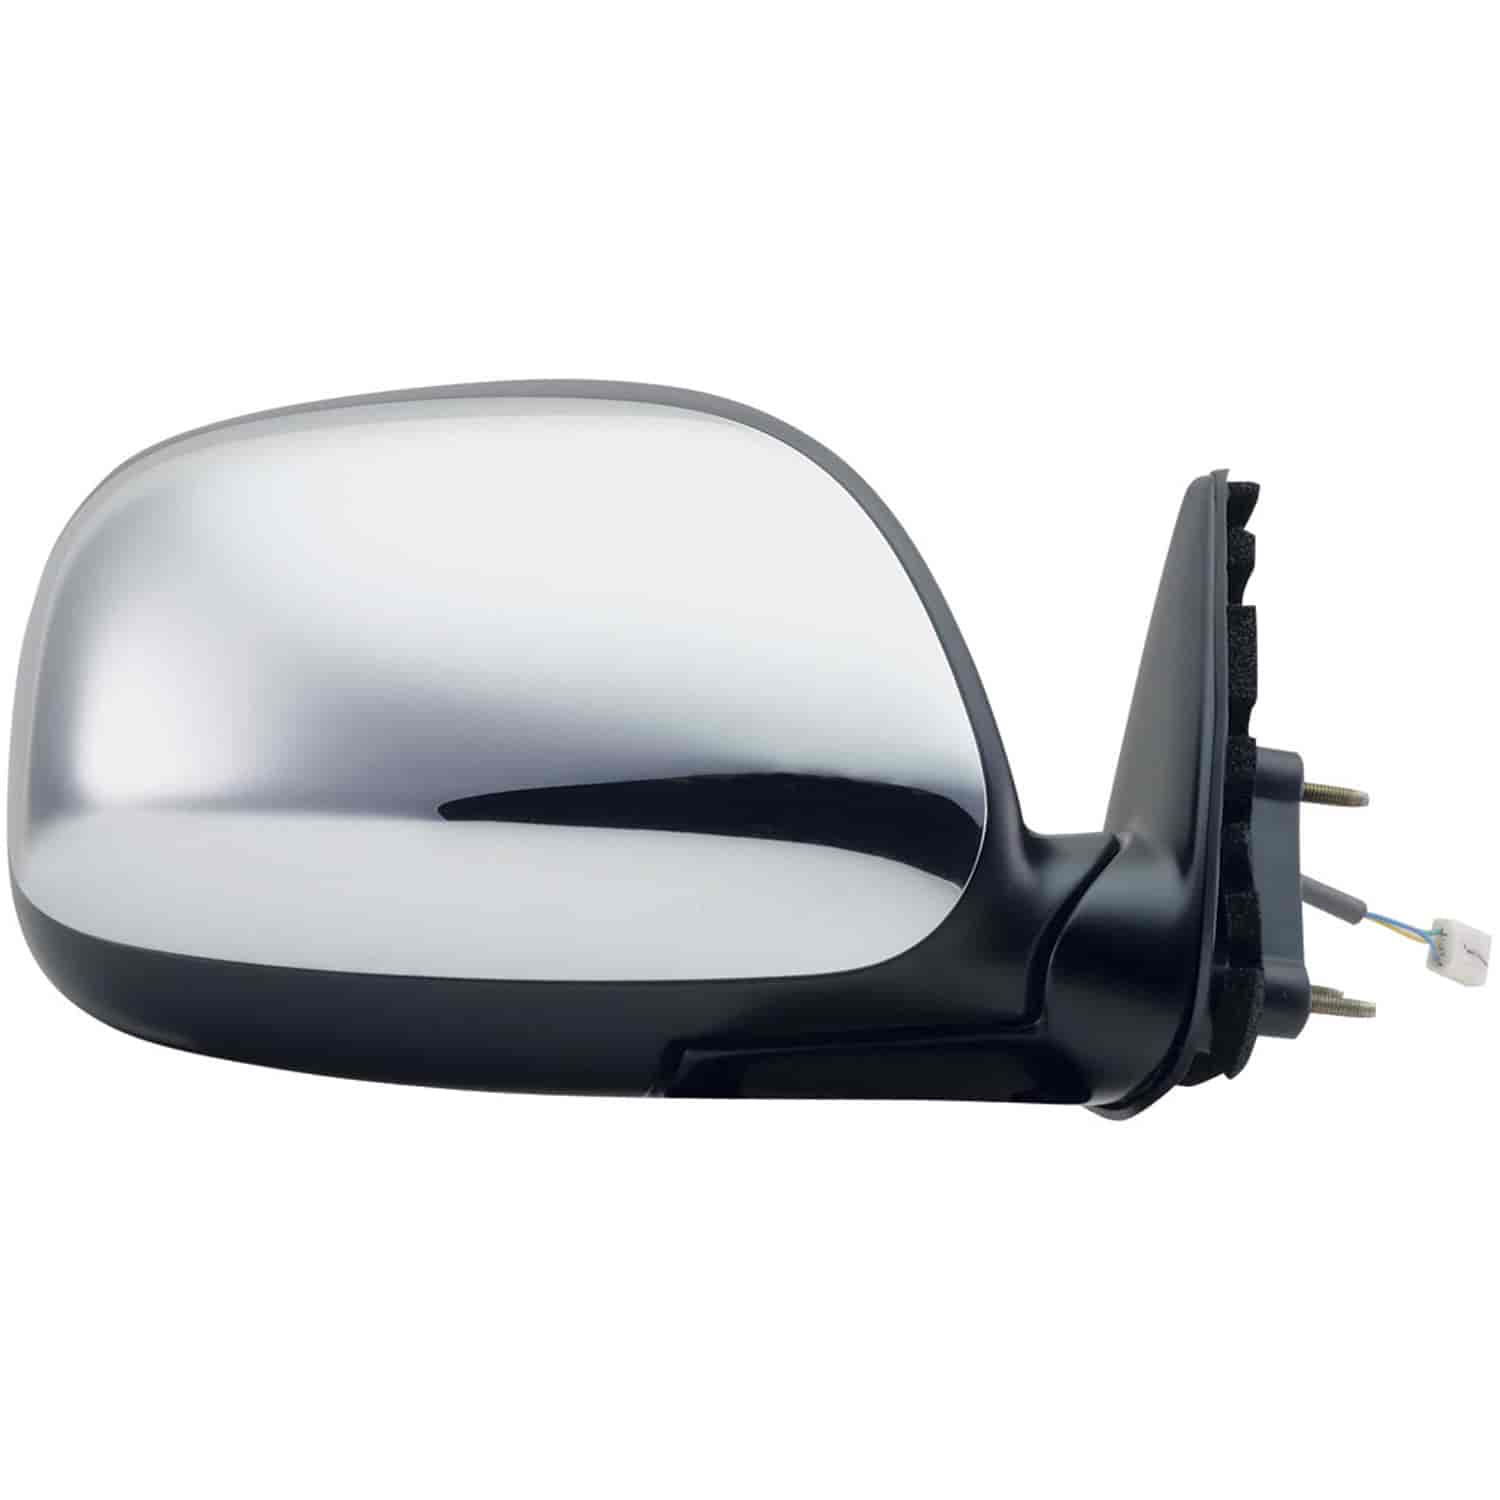 OEM Style Replacement mirror for 00-04 Toyota Tundra Pick-Up passenger side mirror tested to fit and